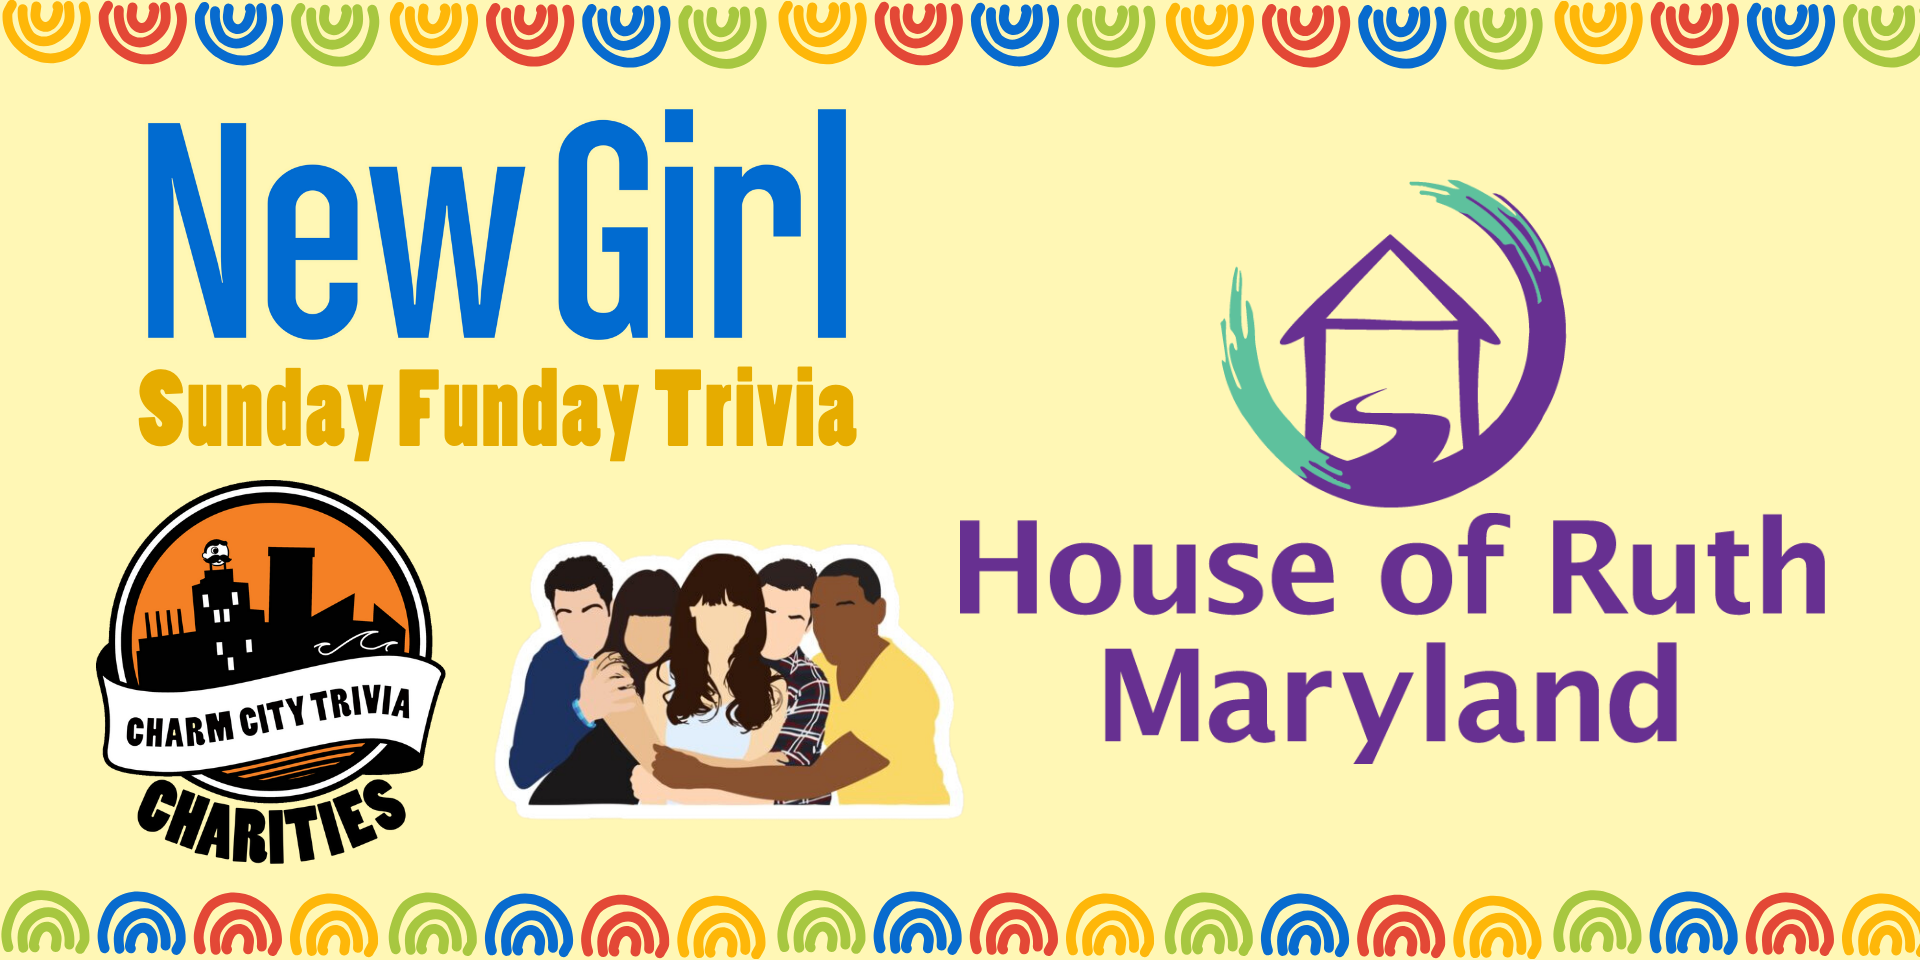 a light yellow background with a colorful border, the Charm City Trivia Charities logo, the House of Ruth Maryland logo, the New Girl logo, a drawing of the main characters, and dark yellow text. The text reads: Sunday Funday Trivia